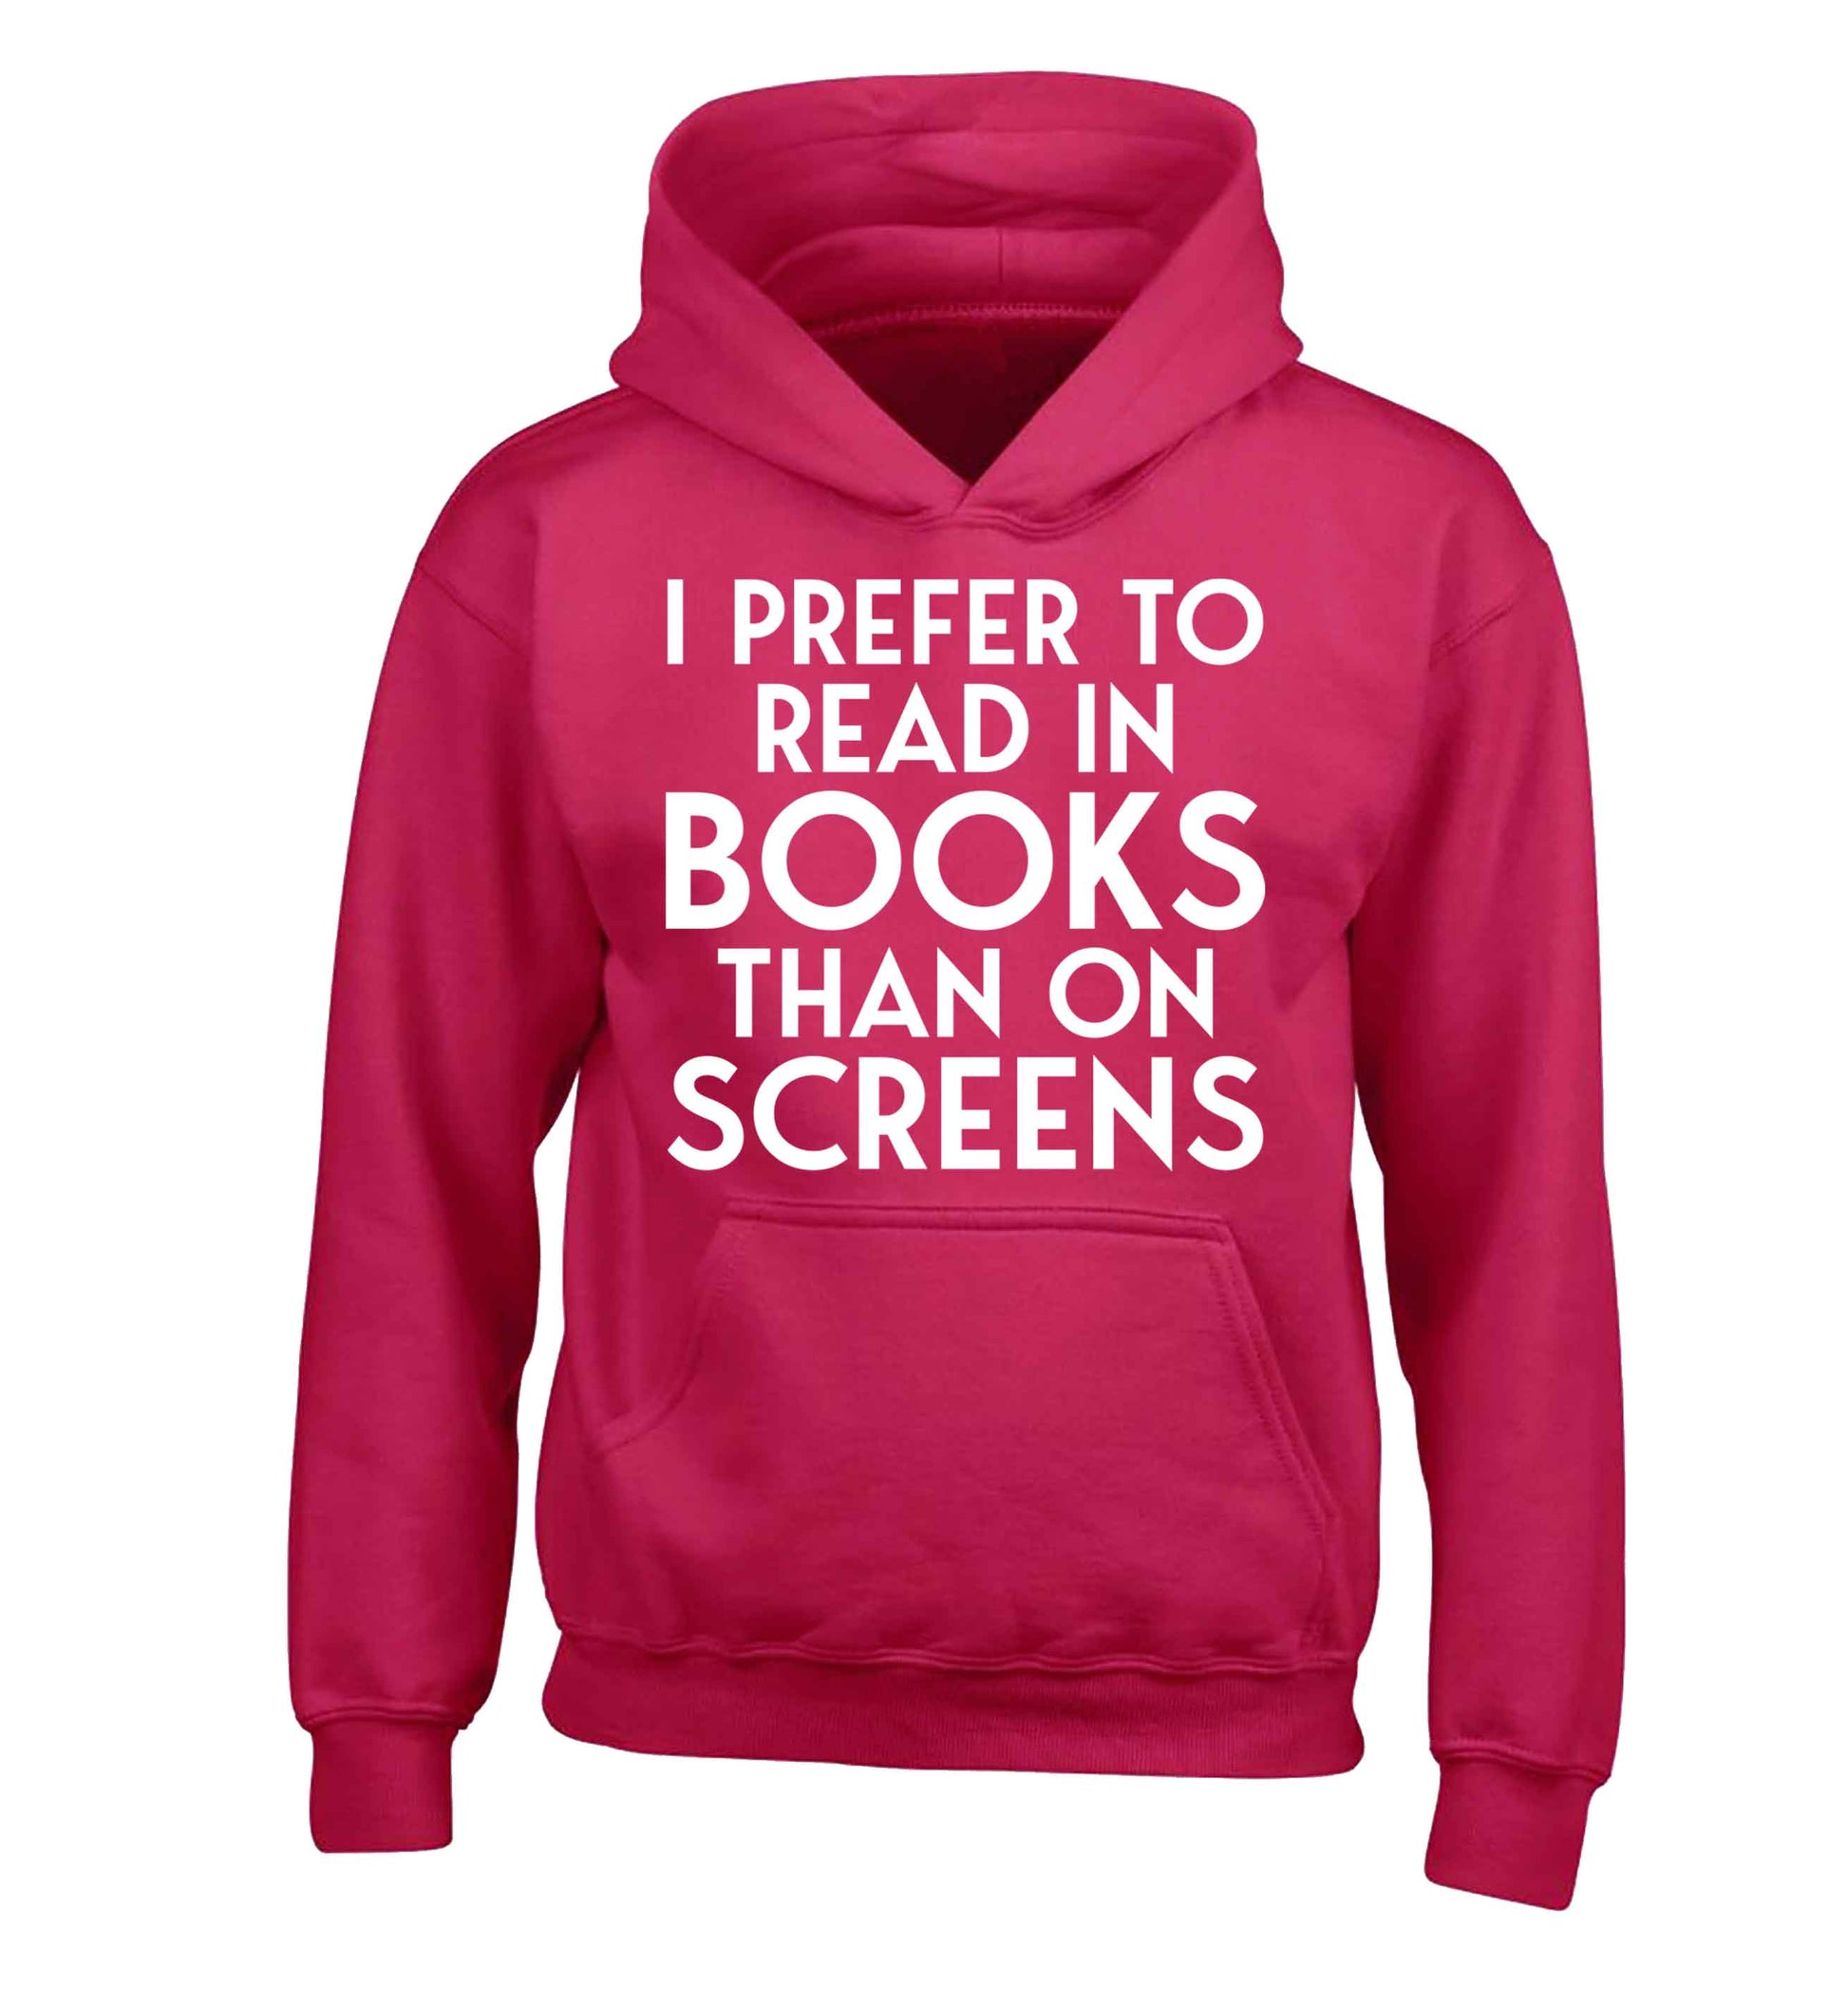 I prefer to read in books than on screens children's pink hoodie 12-13 Years